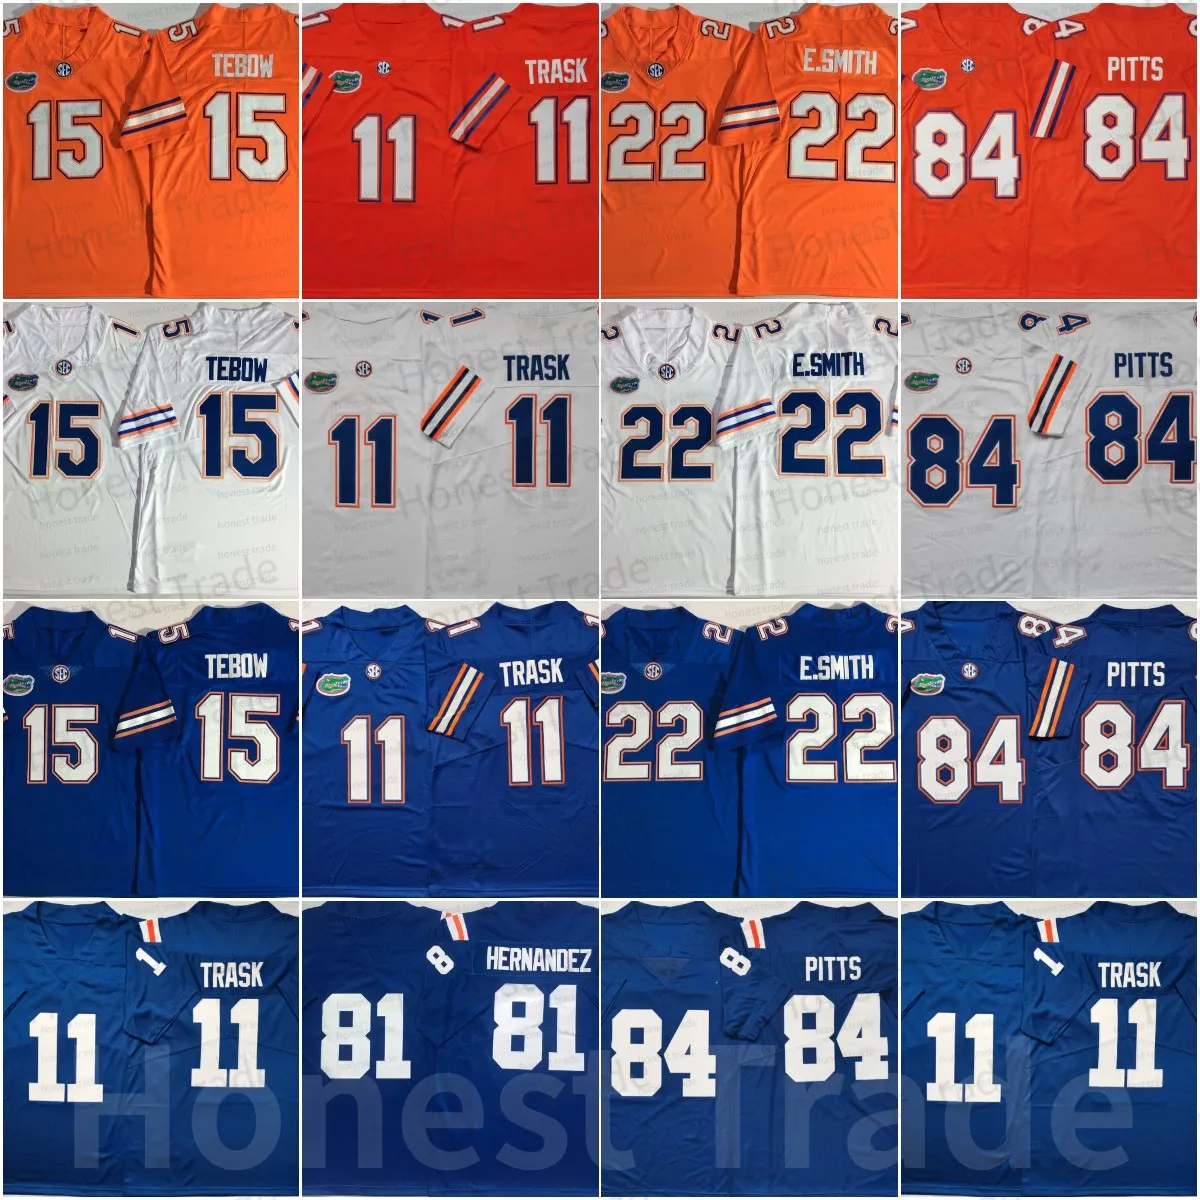 College Florida Tebow 15 College Football Jersey 22 Emmitt Smith 84 Kyle Pitts 11 Kyle Trask Mens Jerseys Embroidery Blue Orange White